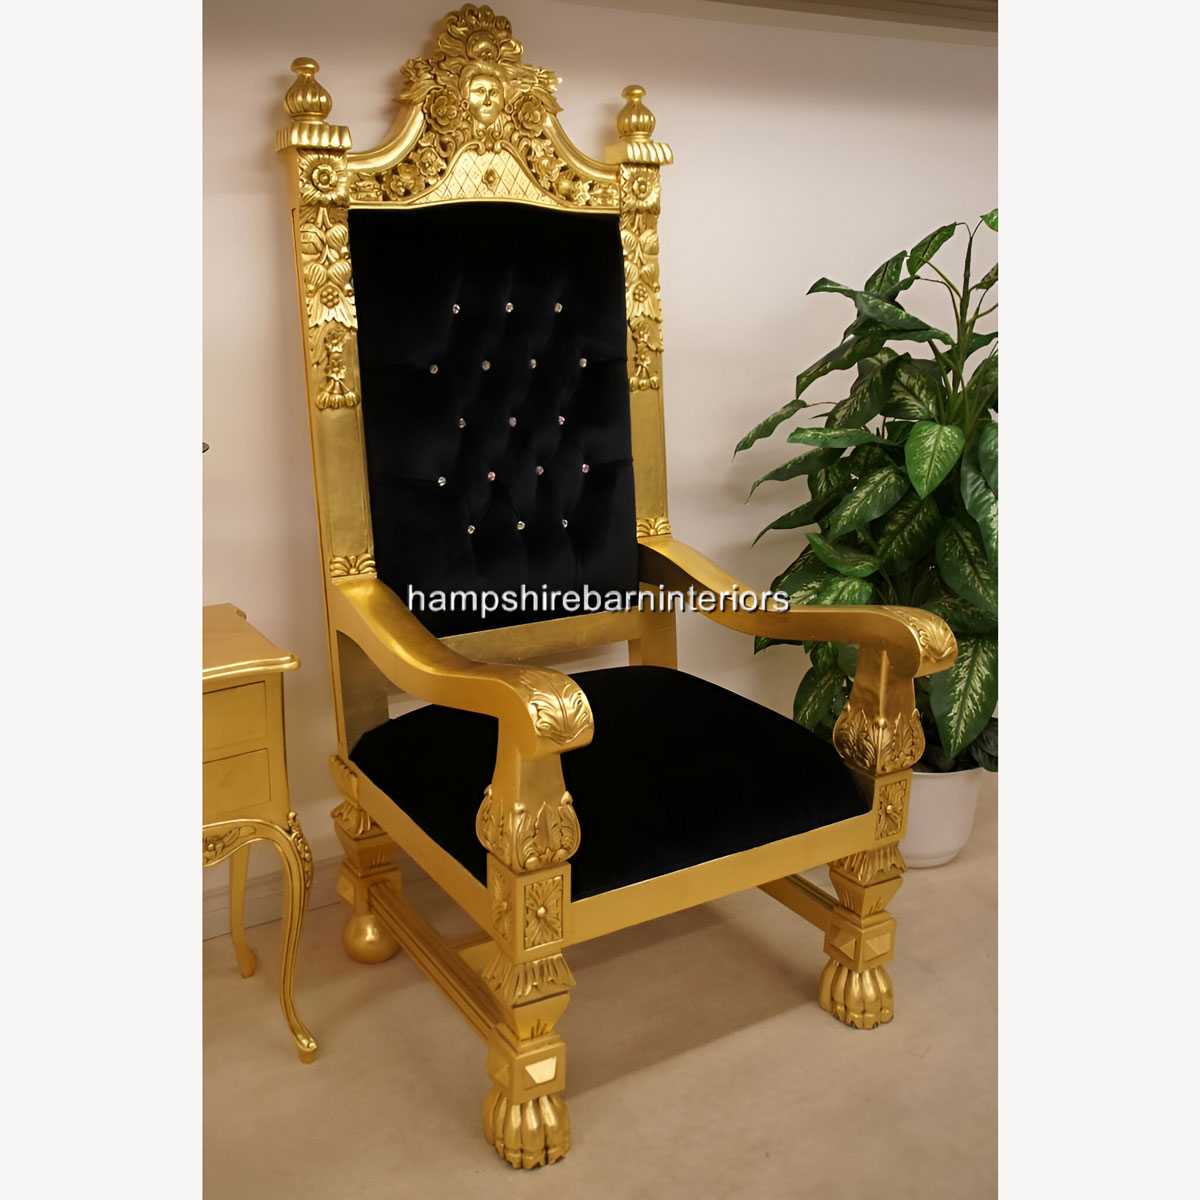 Queens Throne Chair Gold Leaf Black Velvet And Diamond Crystal Buttons 2 - Hampshire Barn Interiors - Queens Throne Chair Gold Leaf, Black Velvet And Diamond Crystal Buttons -